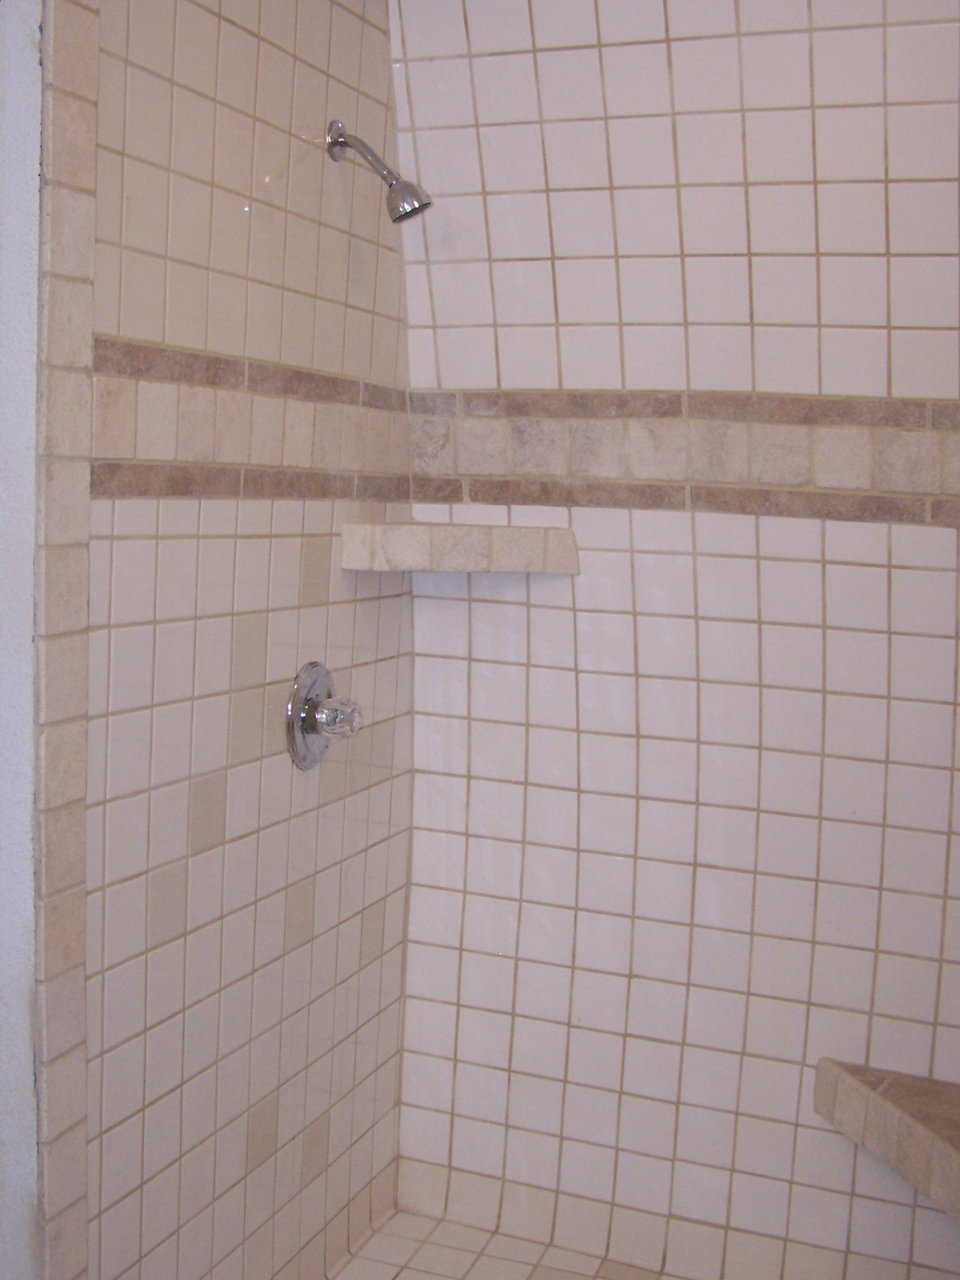 Shower — The tiled shower sports a convenient seat.